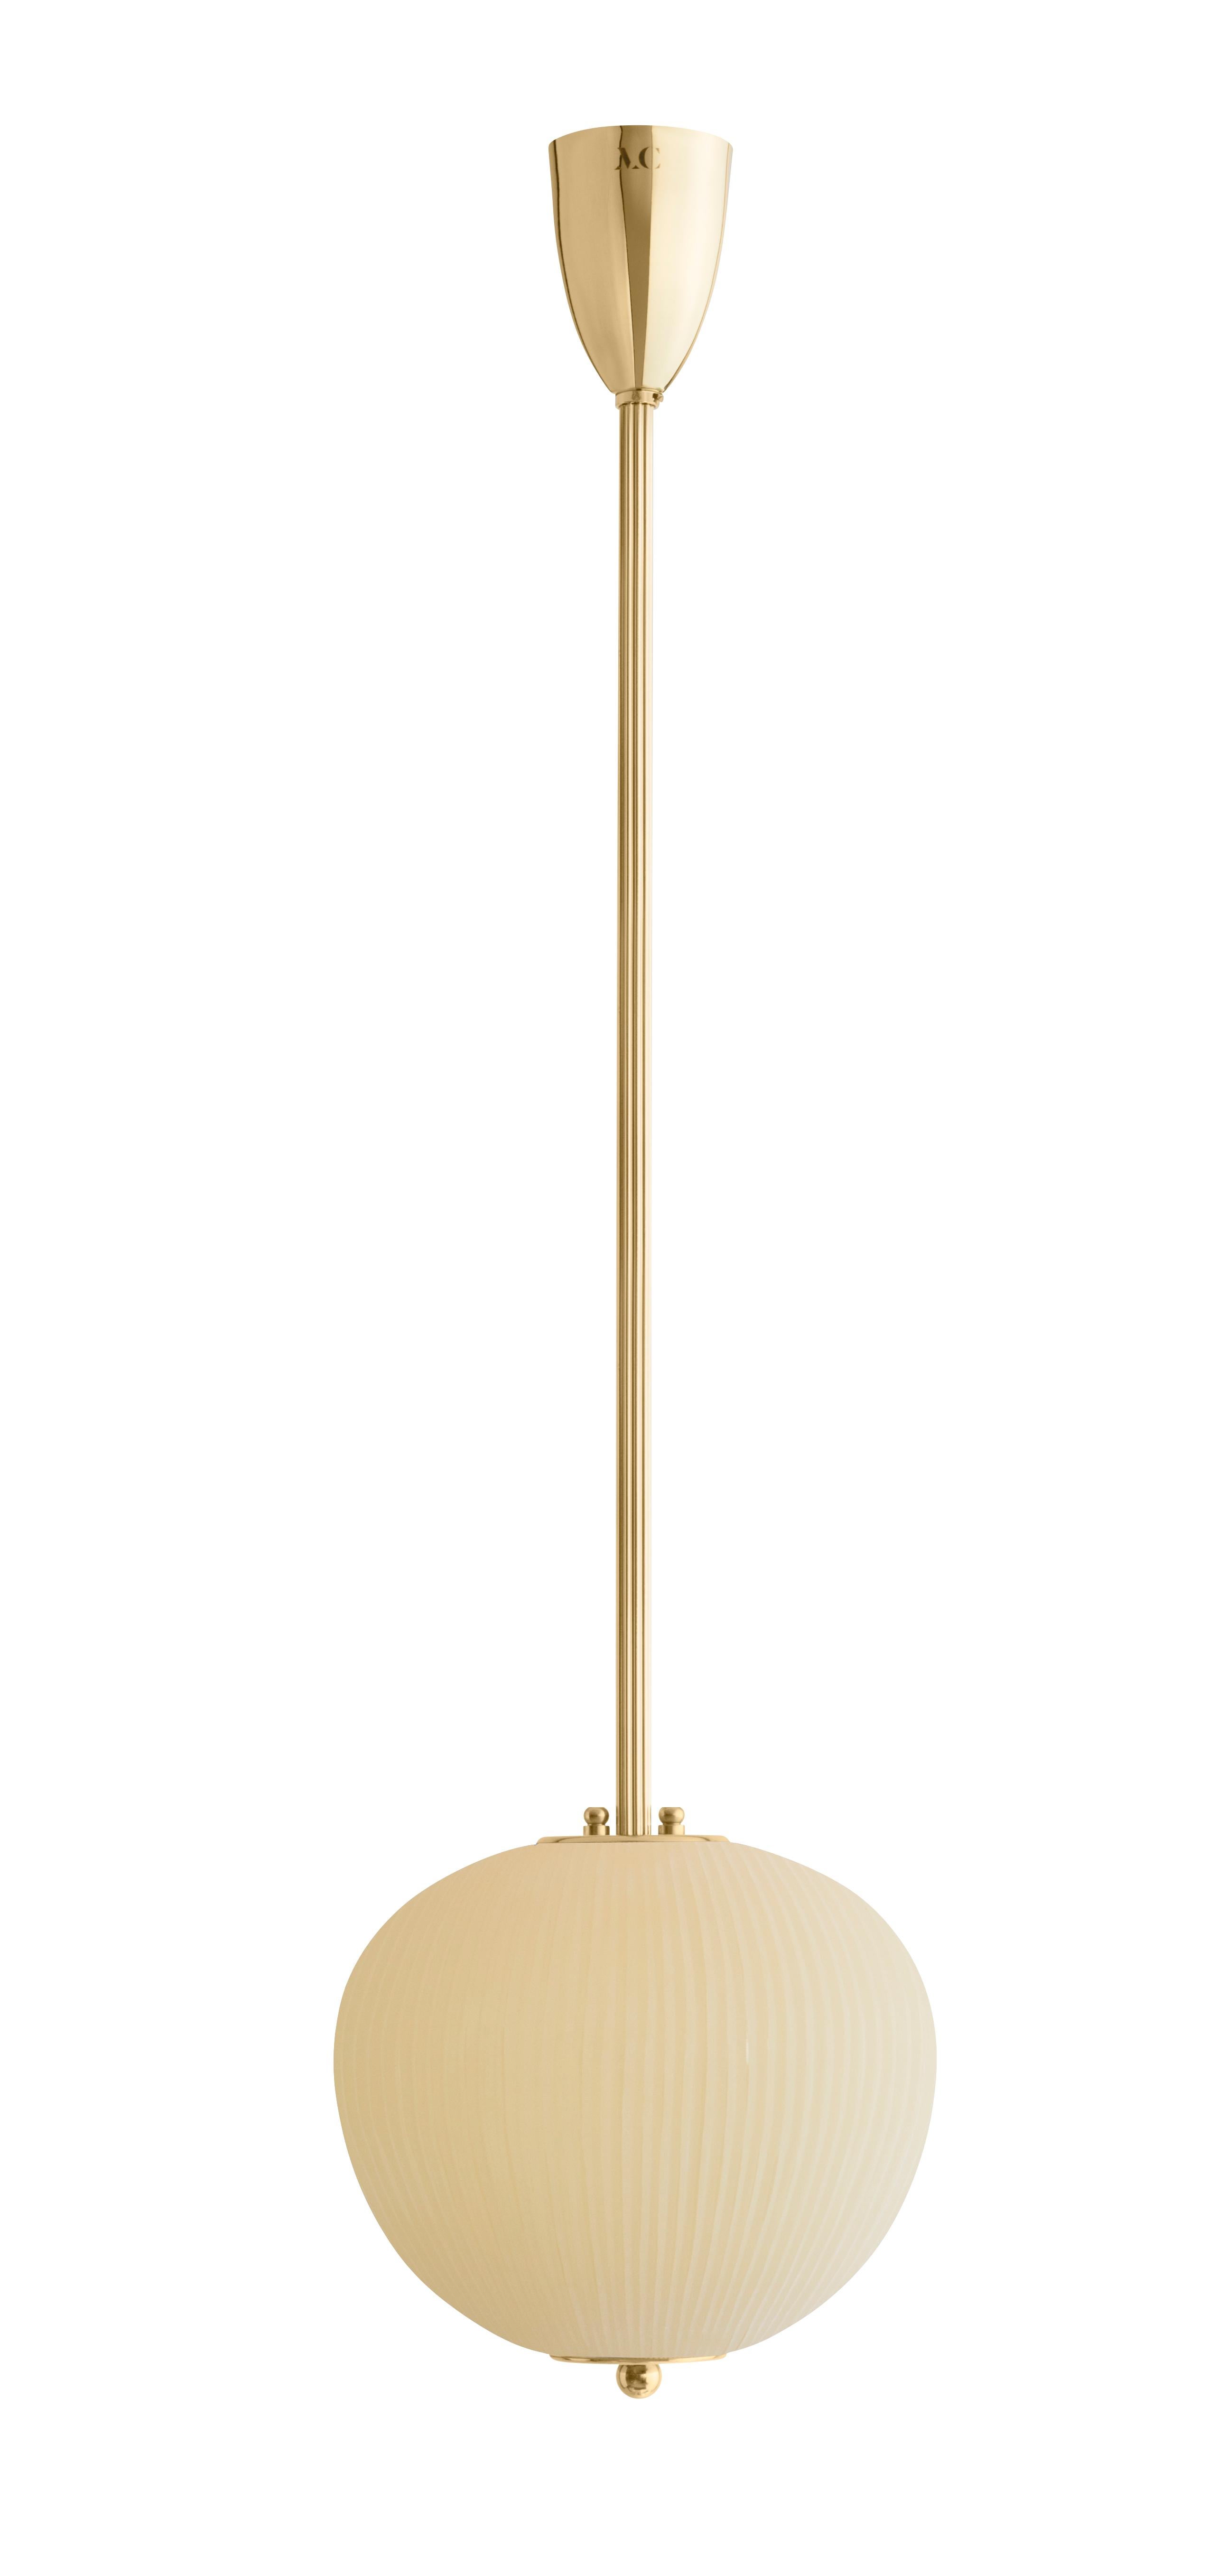 Pendant China 03 by Magic Circus Editions
Dimensions: H 90 x W 26.2 x D 26.2 cm, also available in H 110, 130, 150, 175, 190
Materials: Brass, mouth blown glass sculpted with a diamond saw
Colour: Mustard yellow

Available finishes: Brass,